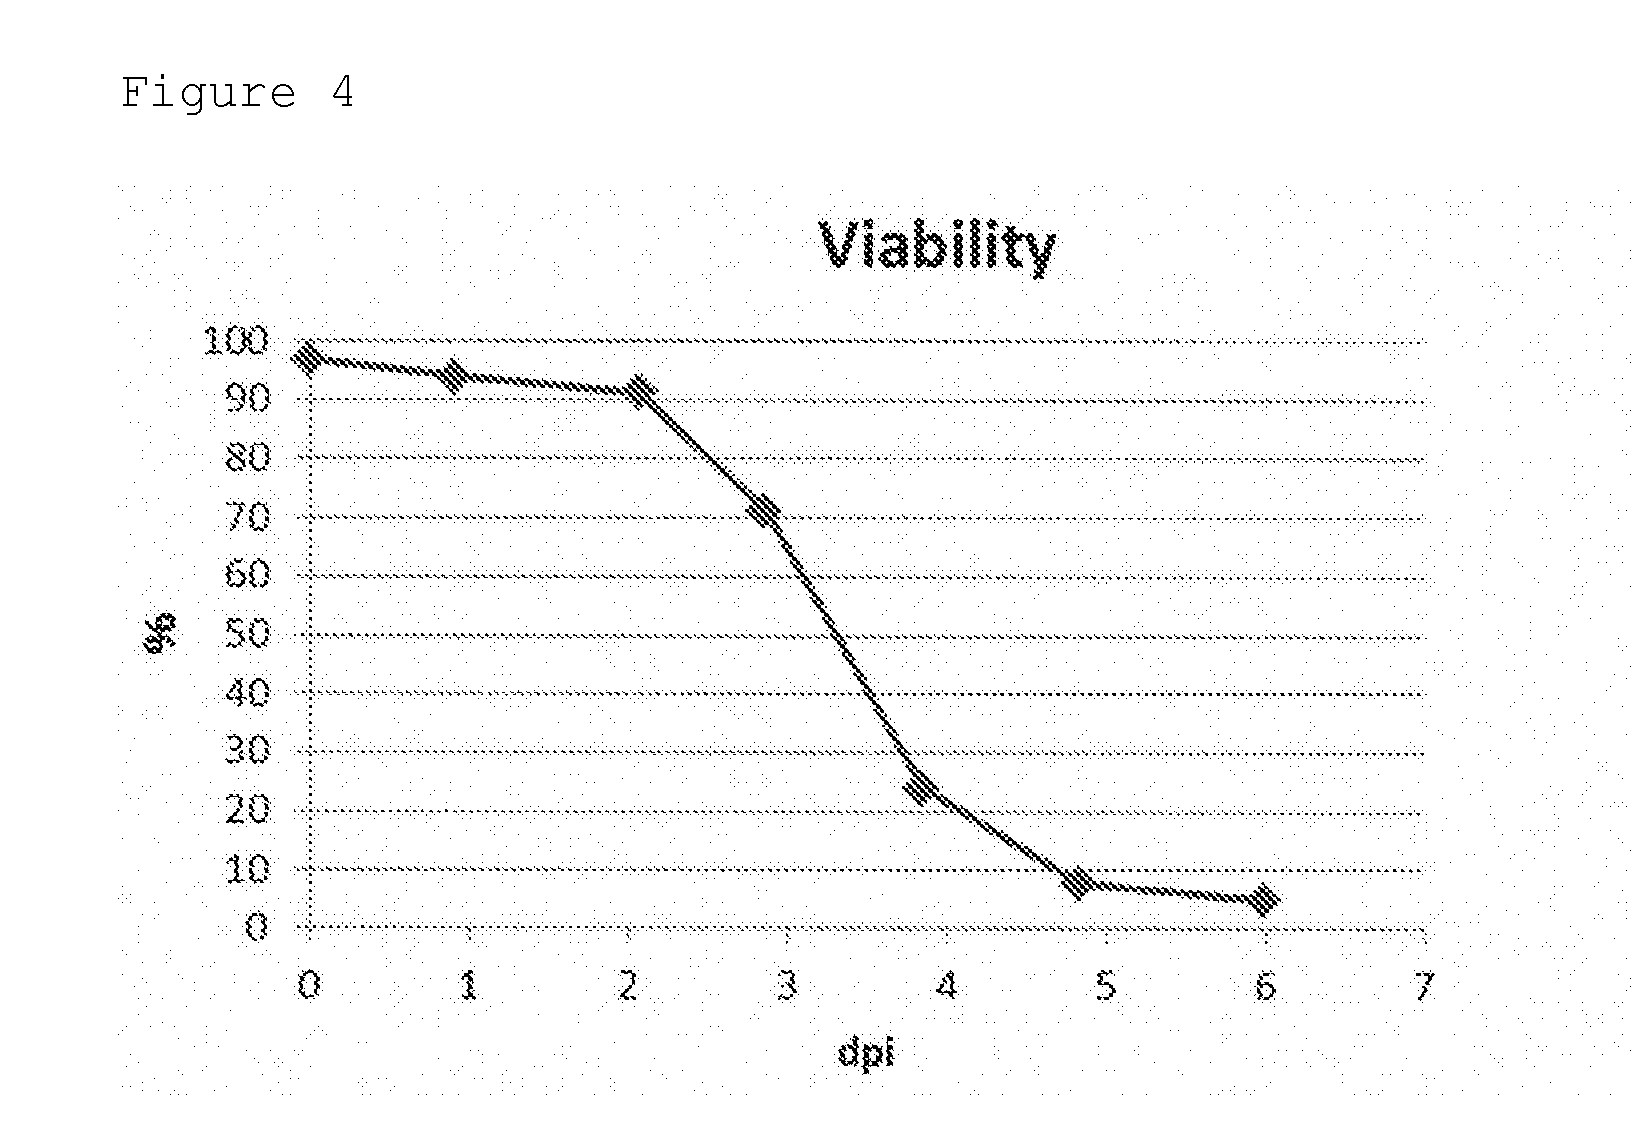 Production method for culture containing virus-like particles